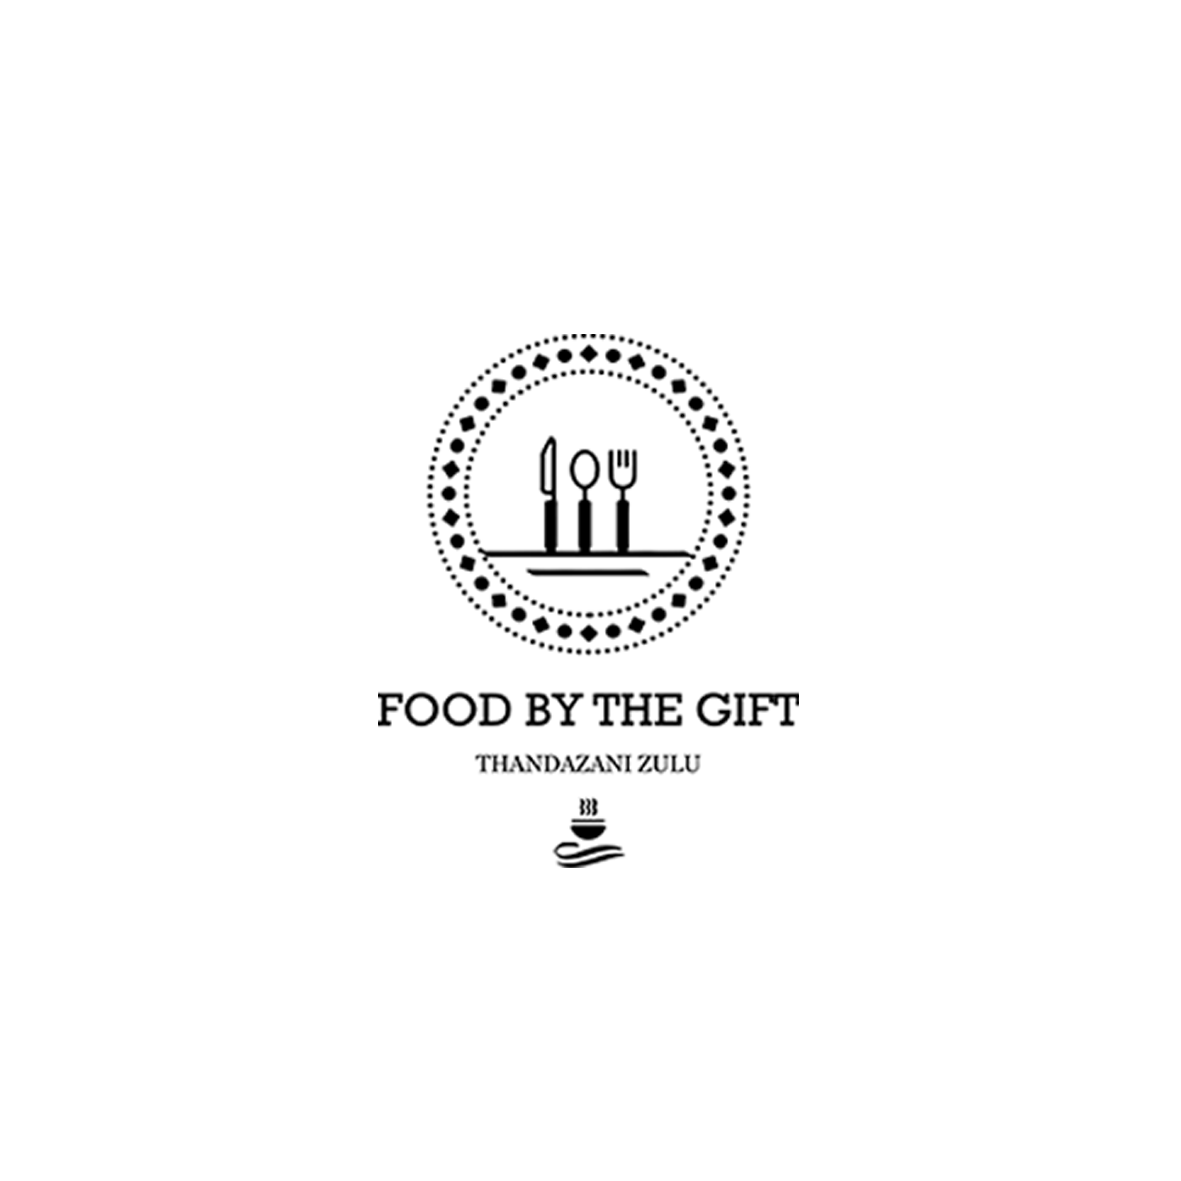 Food by the gift